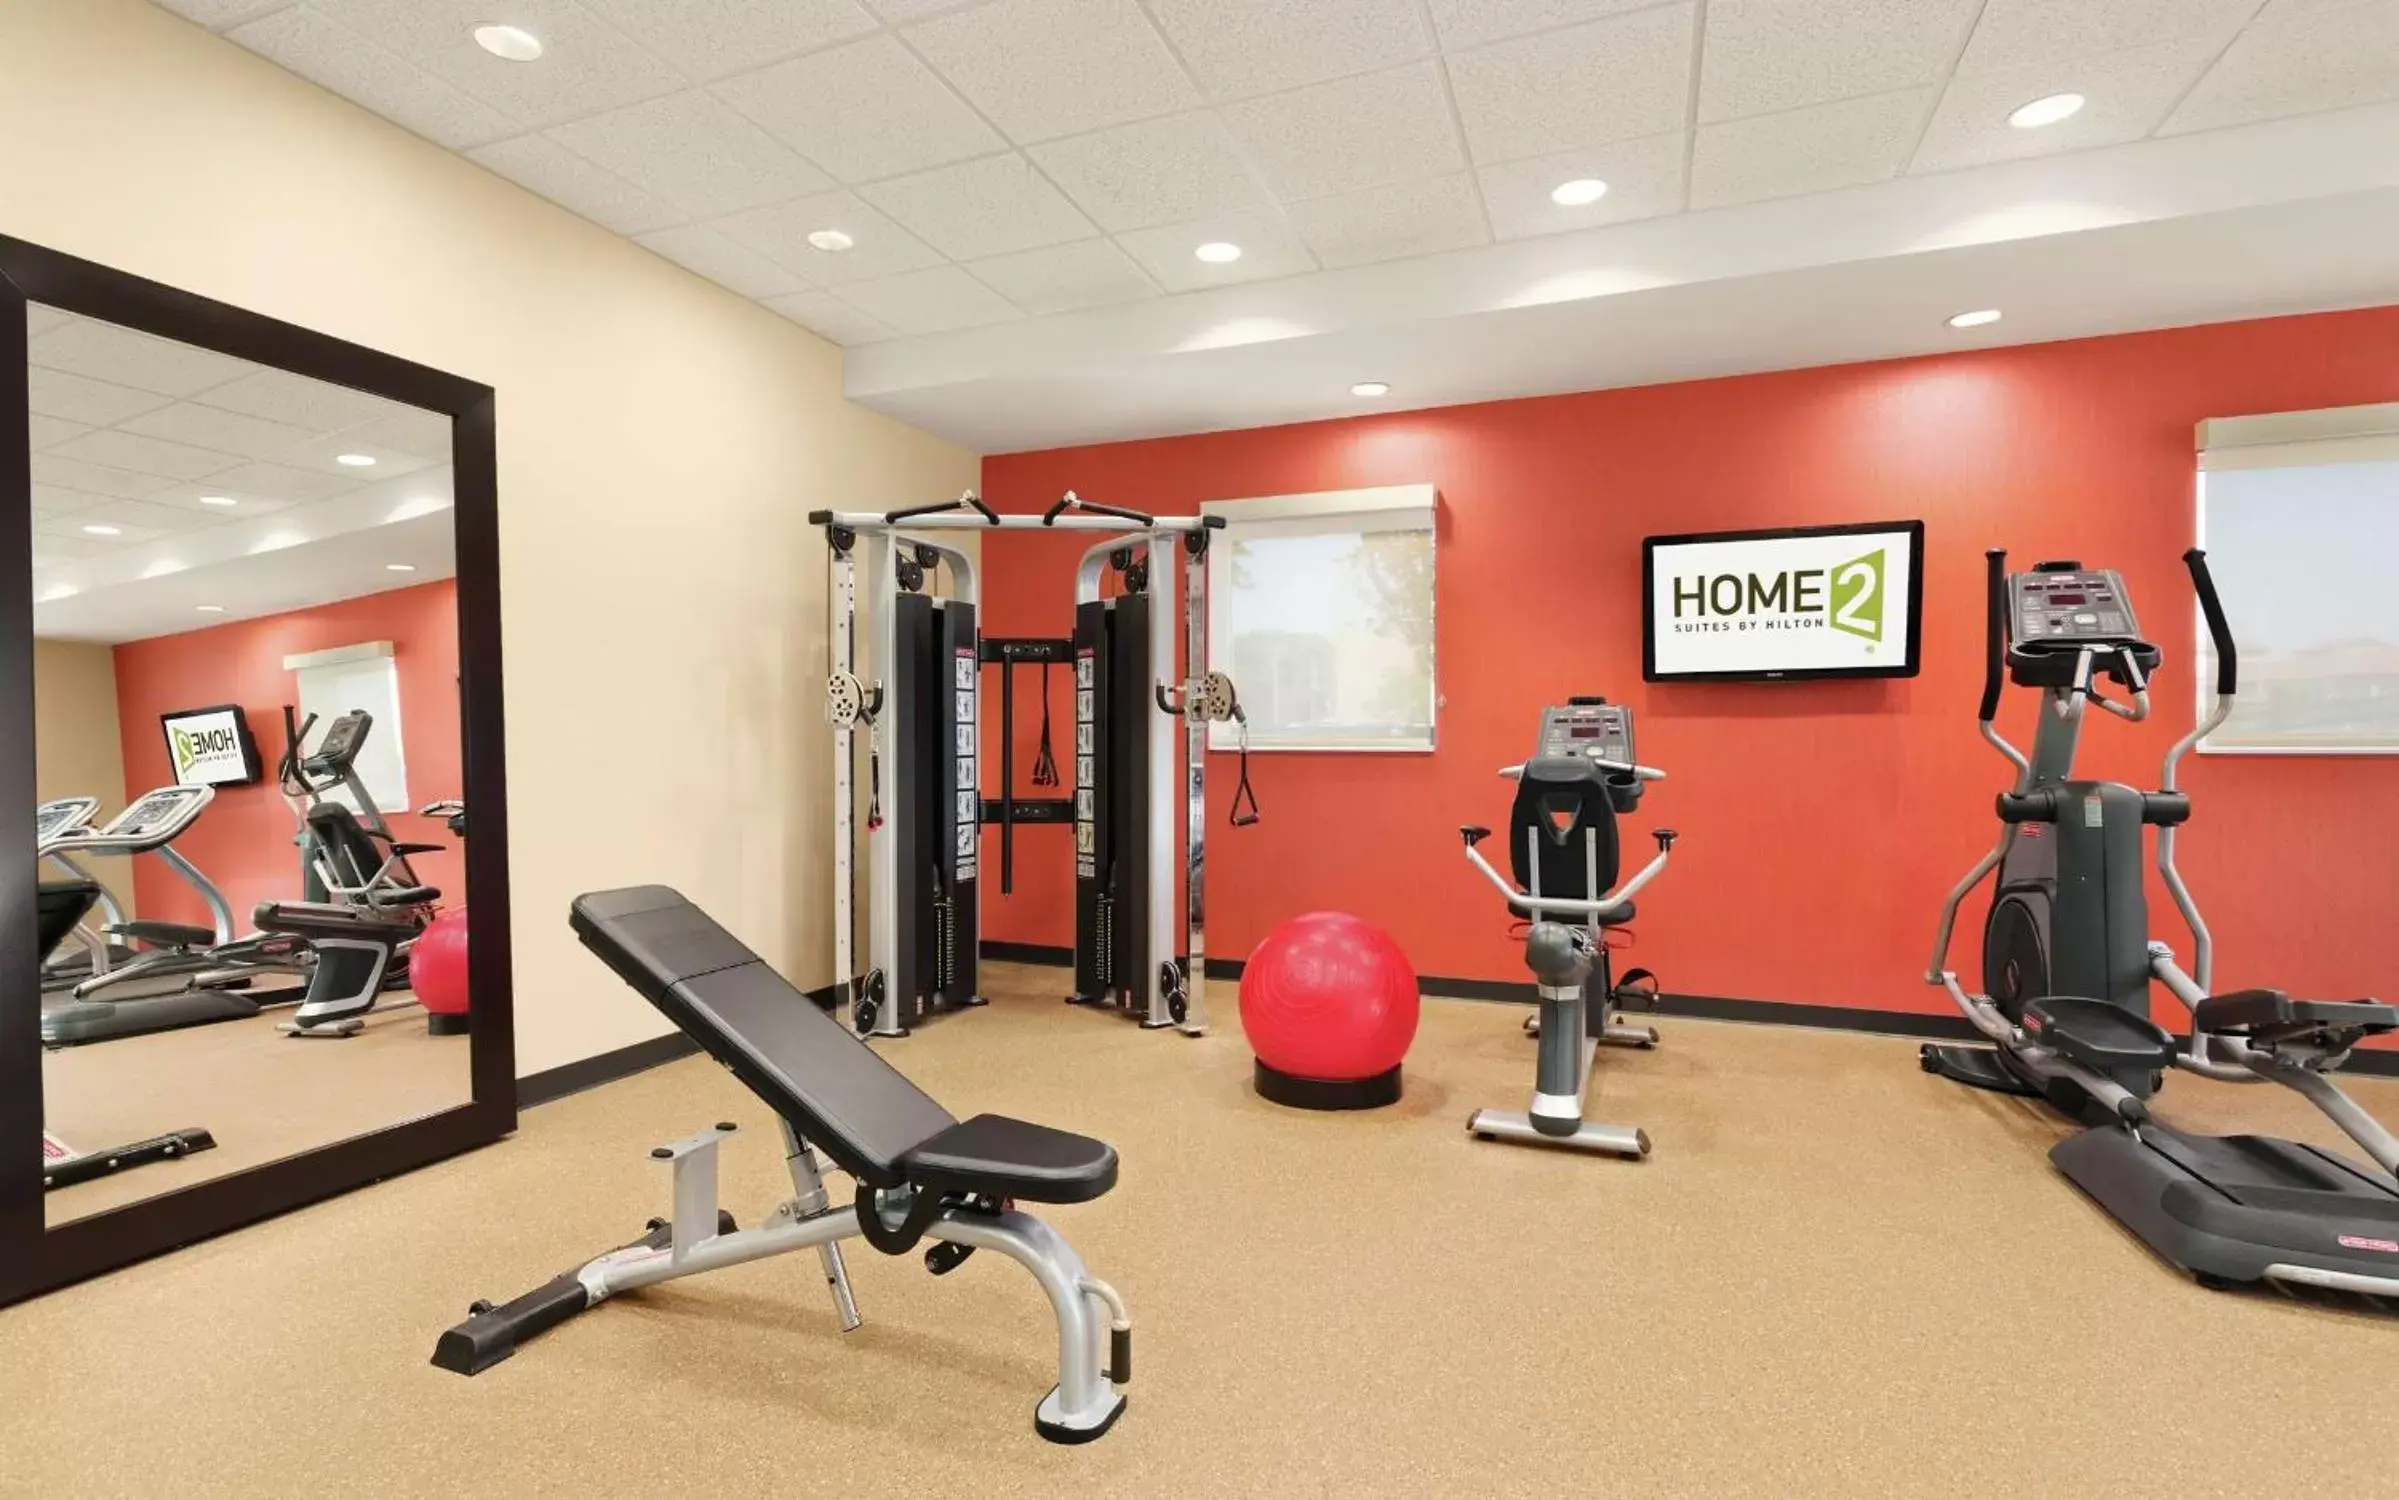 Fitness centre/facilities, Fitness Center/Facilities in Home2 Suites St. Louis / Forest Park